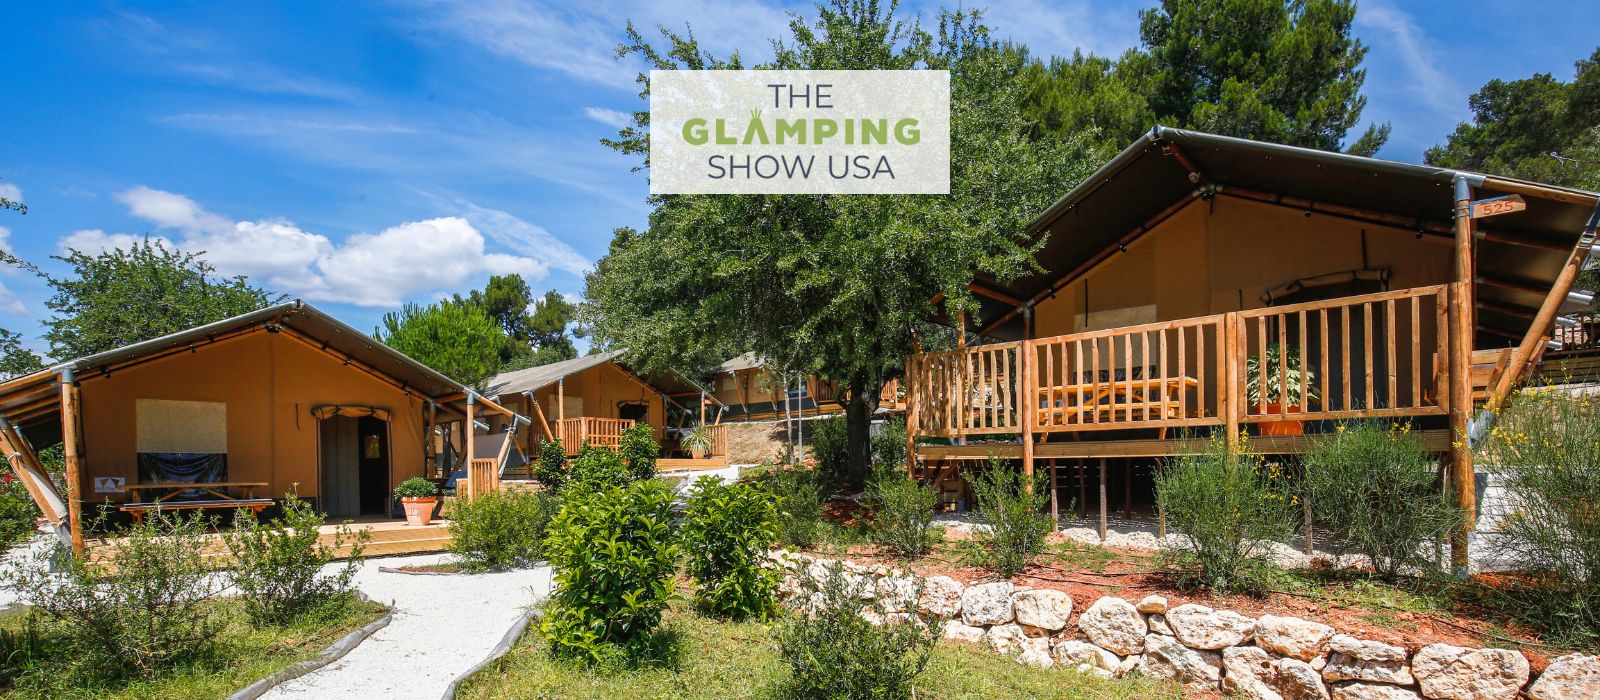 The Glamping Show USA 2022